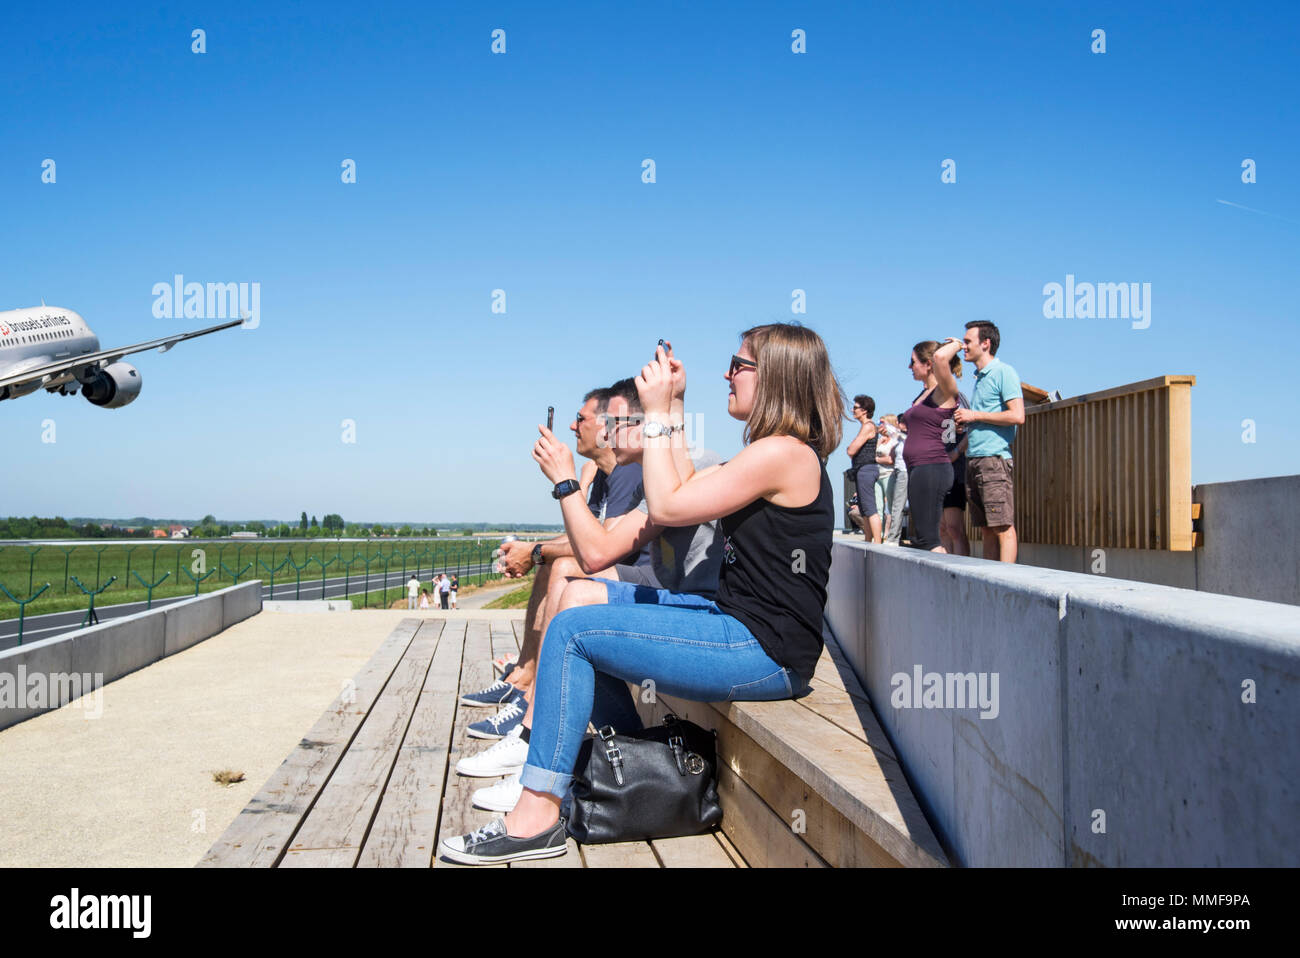 Plane spotters on aircraft spotting platform watching airplane from Brussels Airlines taking off from runway at Brussels Airport, Zaventem, Belgium Stock Photo